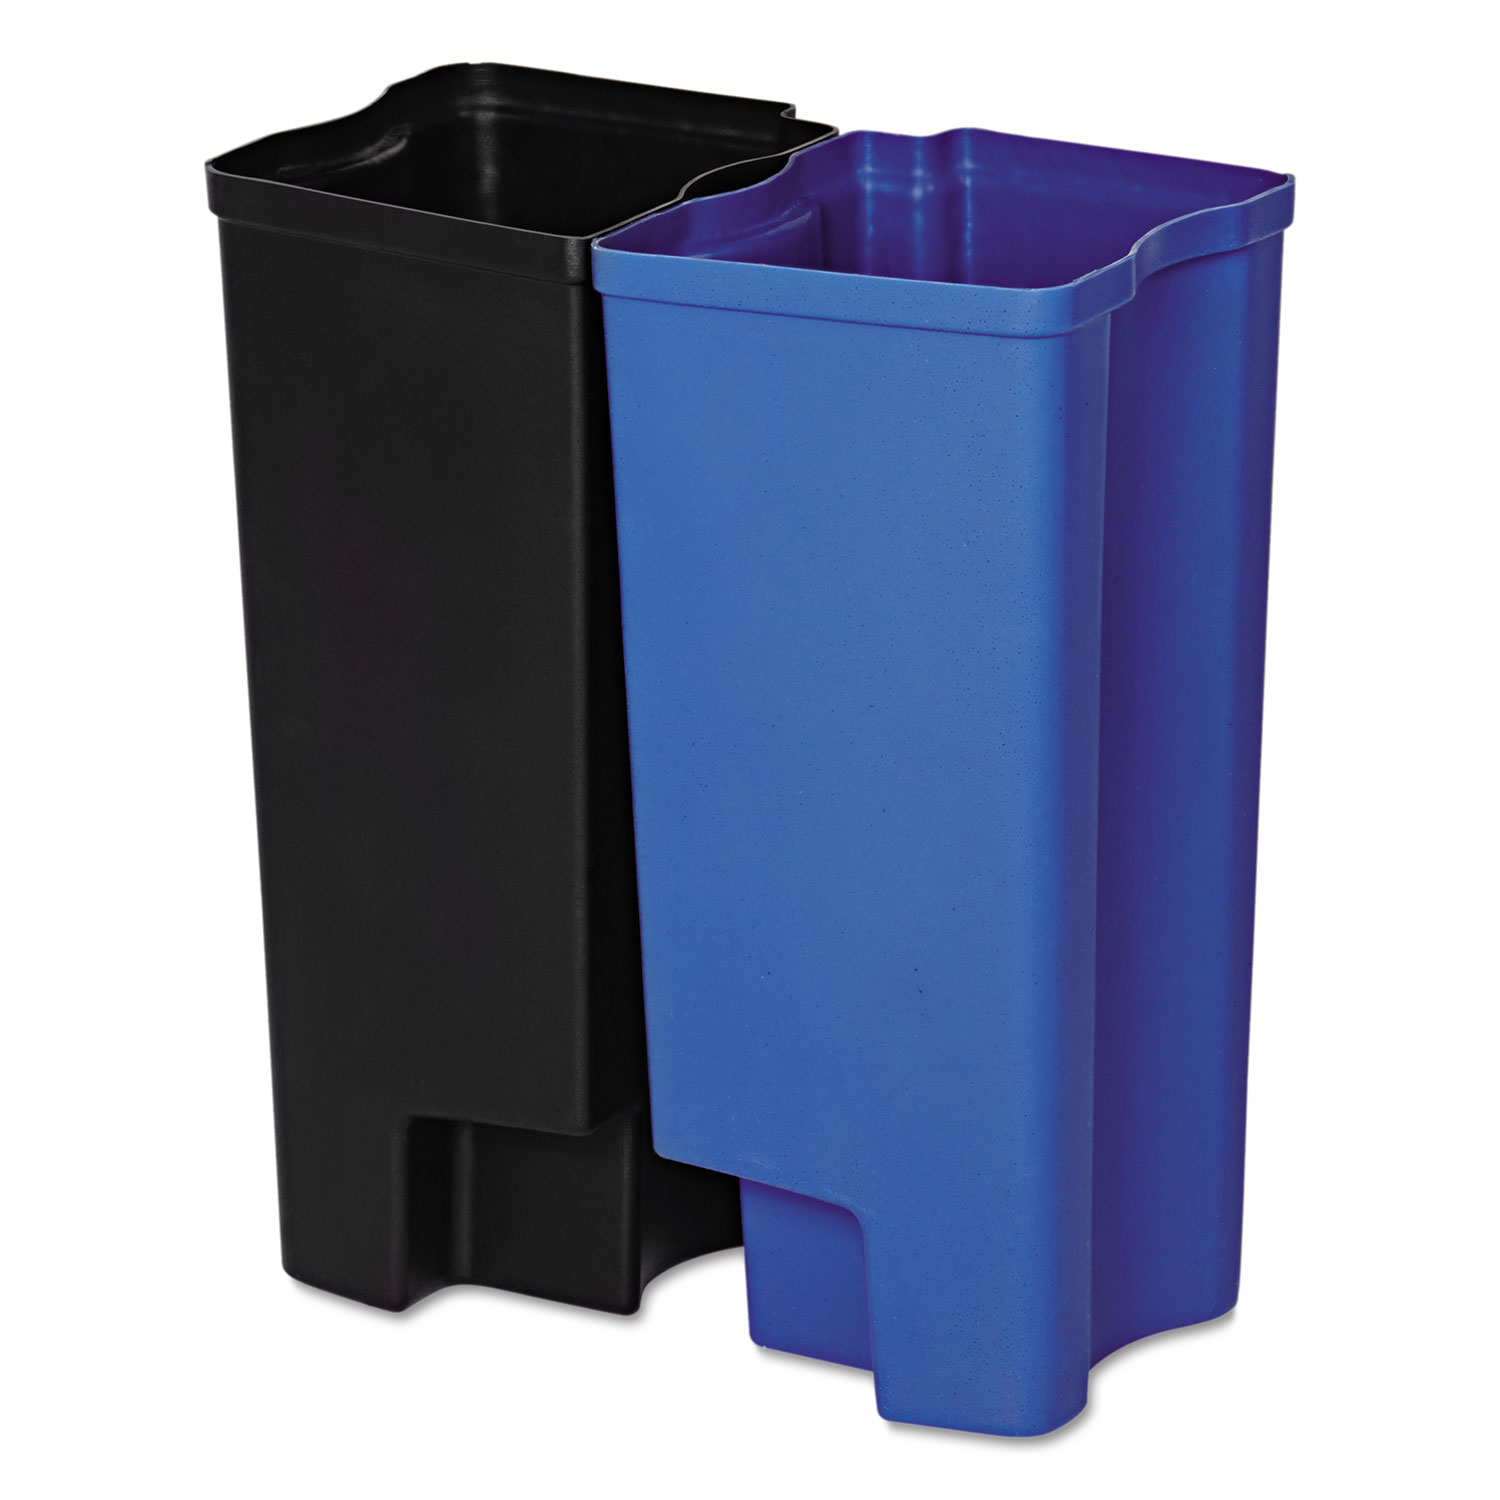  Rubbermaid Commercial 1902007 Step-On Rigid Dual Liner for Stainless End Step, Plastic, 8 gal, Black/Blue (RCP1902007) 